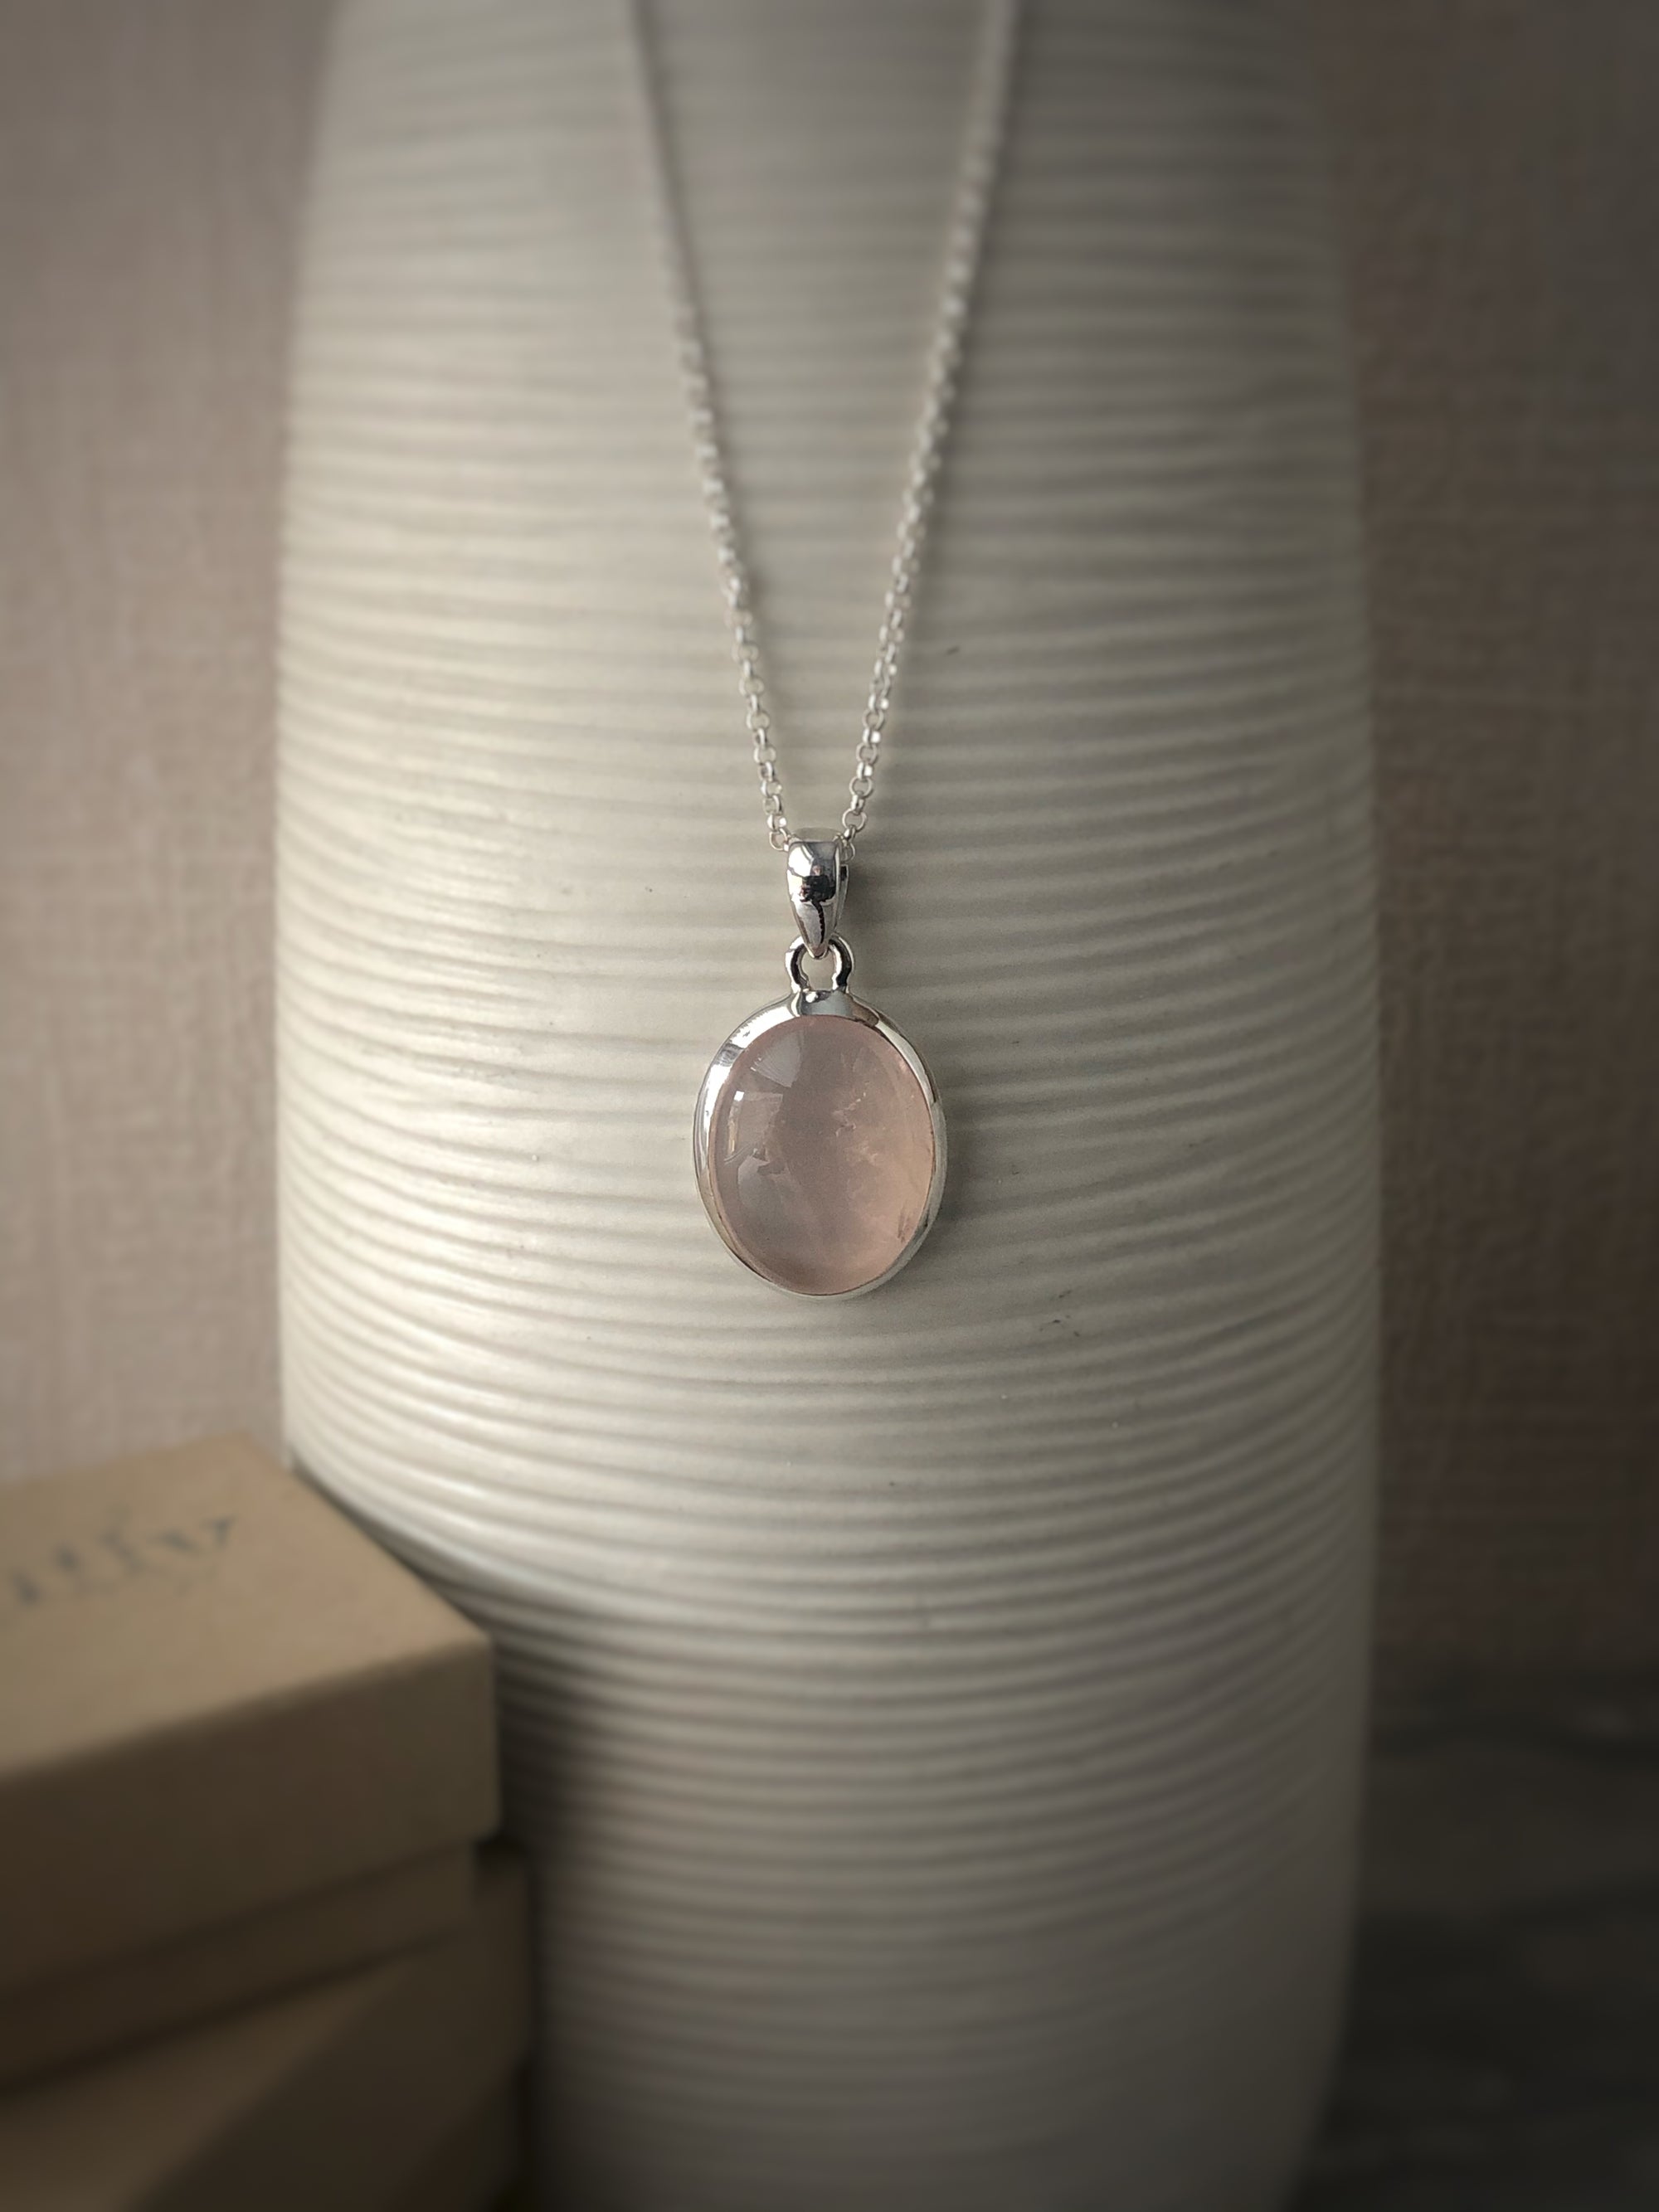 Small Rose Quartz Sterling Silver Pendant Necklace Tiger Lily London